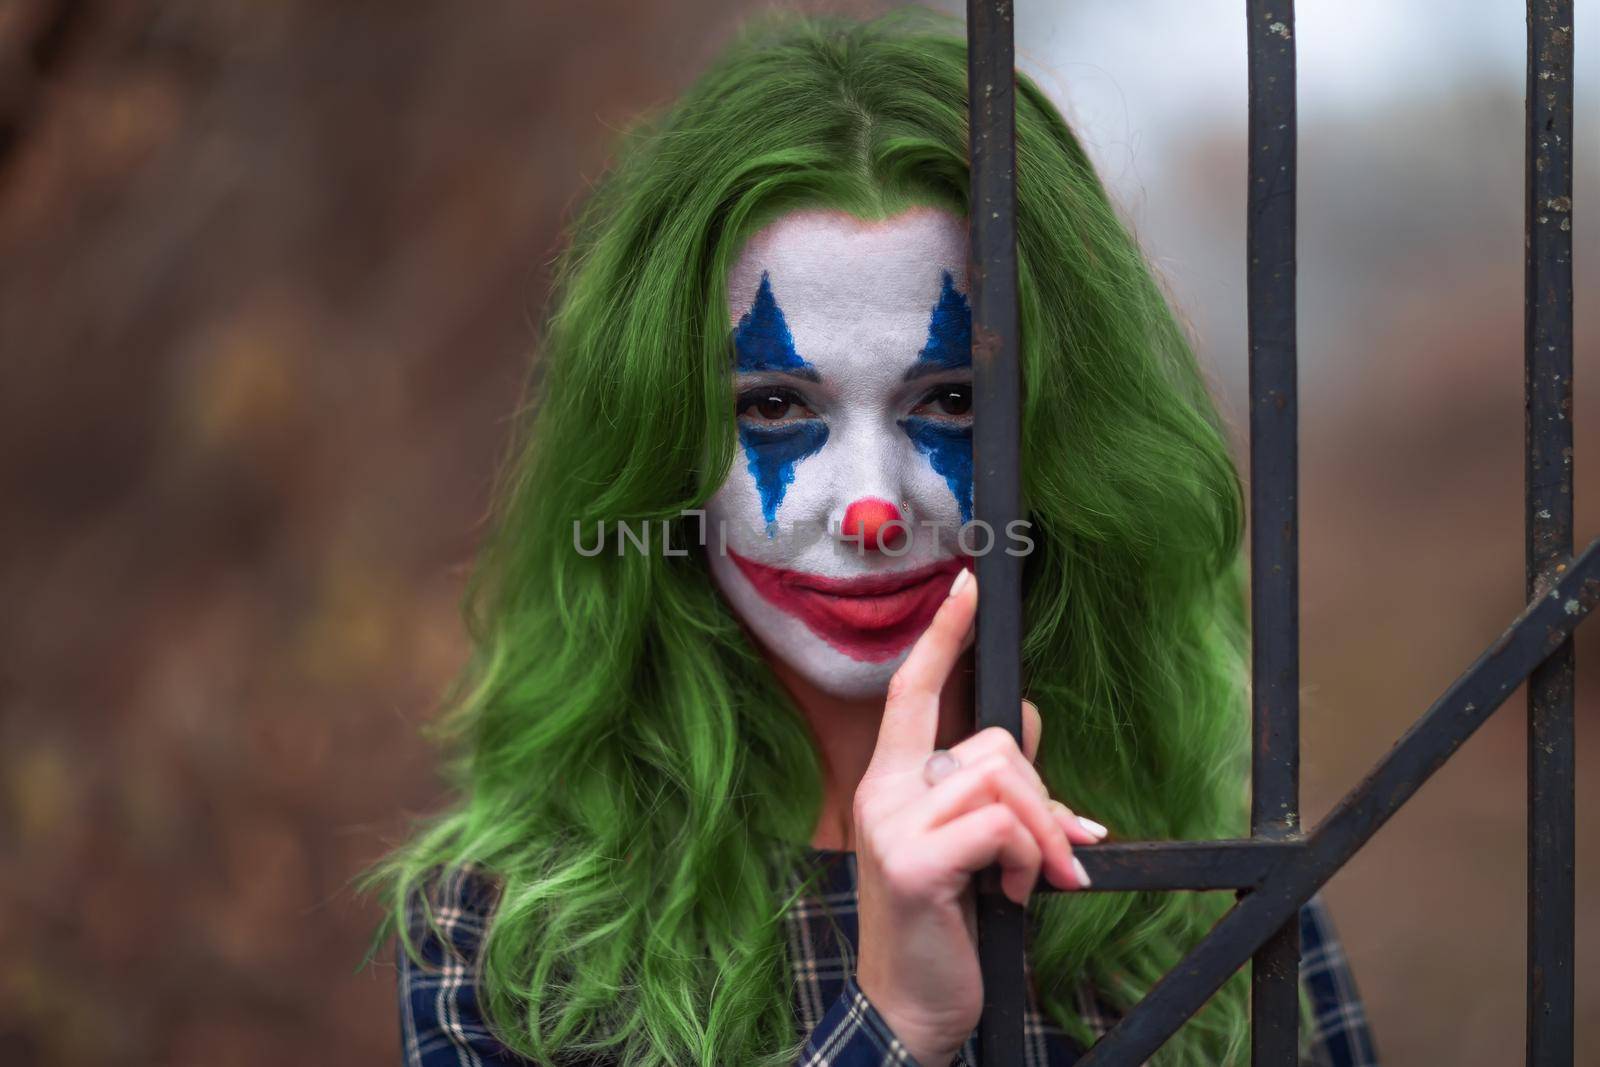 Close-up portrait of a greenhaired girl in chekered dress with joker makeup on a blurry brown background.